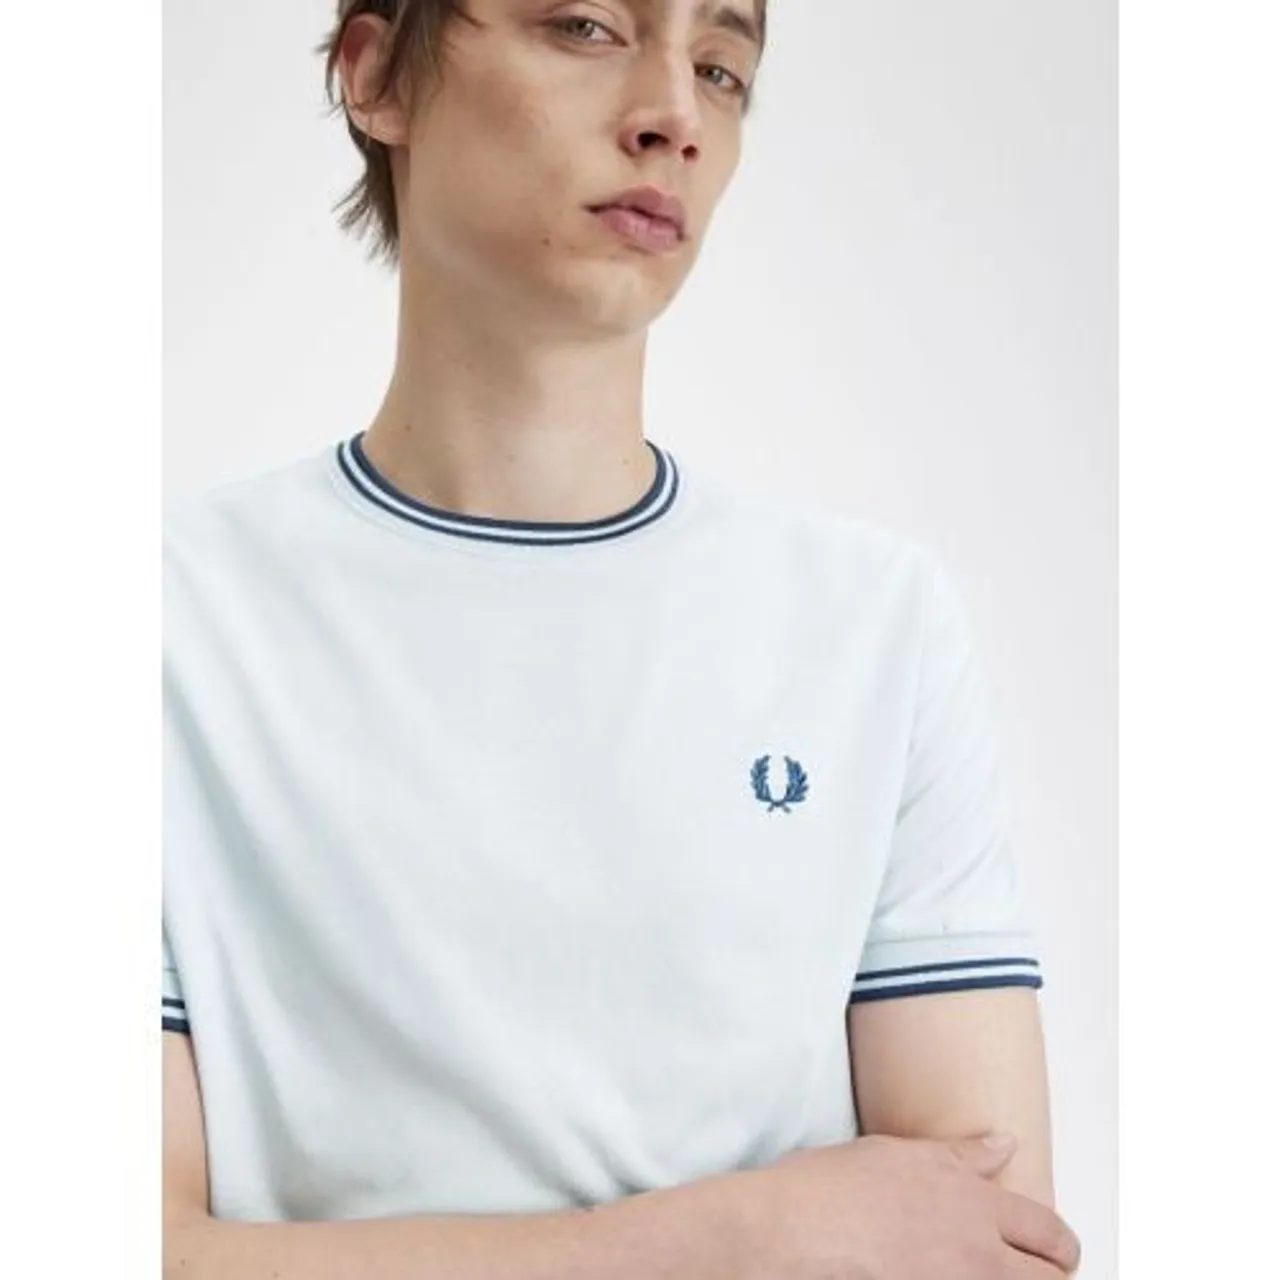 Fred Perry Mens Light Ice Midnight Blue Twin Tipped T-Shirt